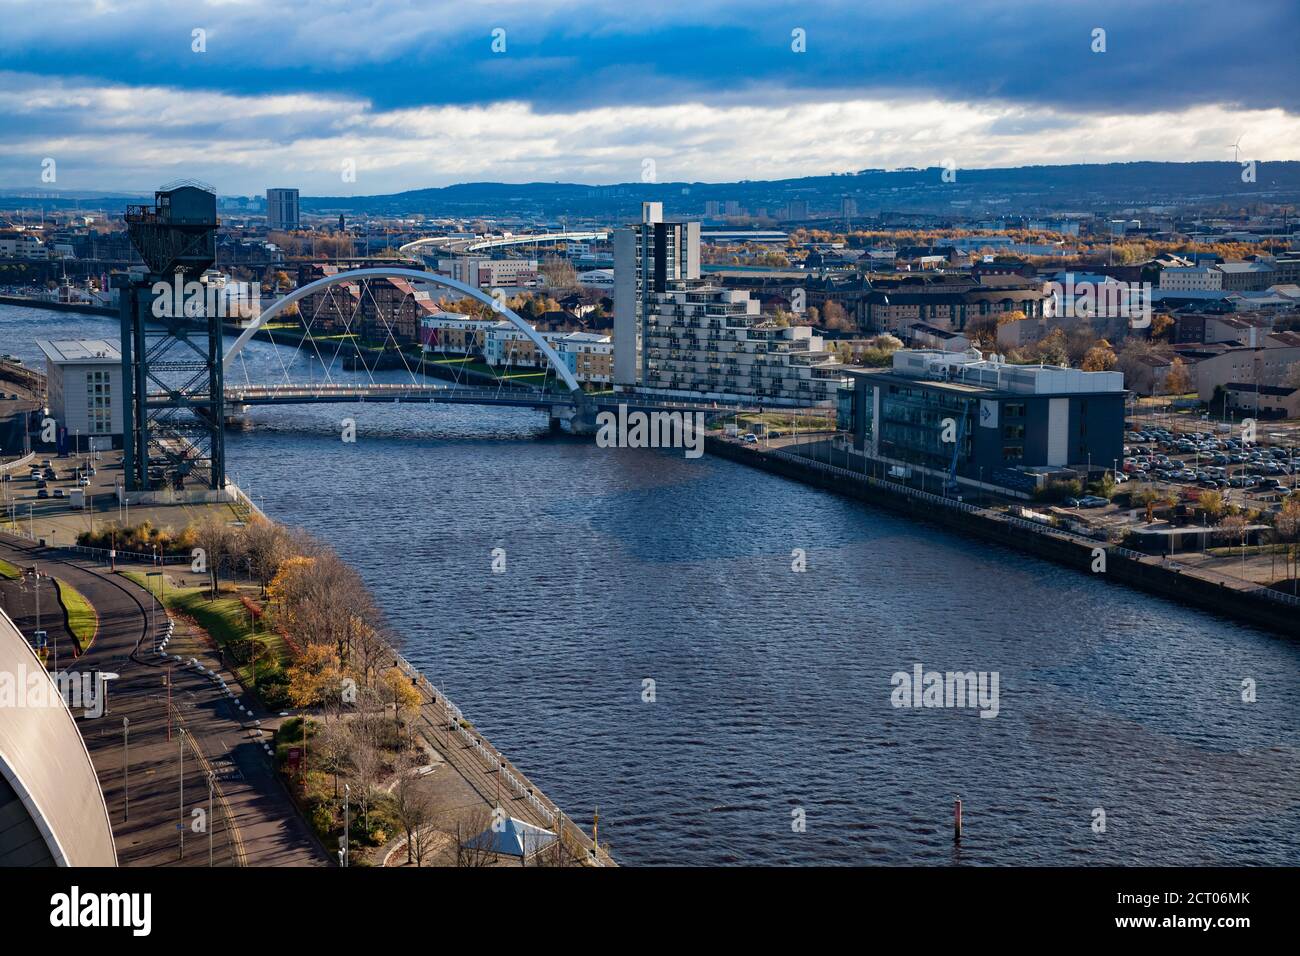 Glasgow / Scotland - Nov 13, 2013: Autumn view. Clyde river embankment, water and Squinty Bridge. Aerial panorama. Blue sky with clouds. Stock Photo